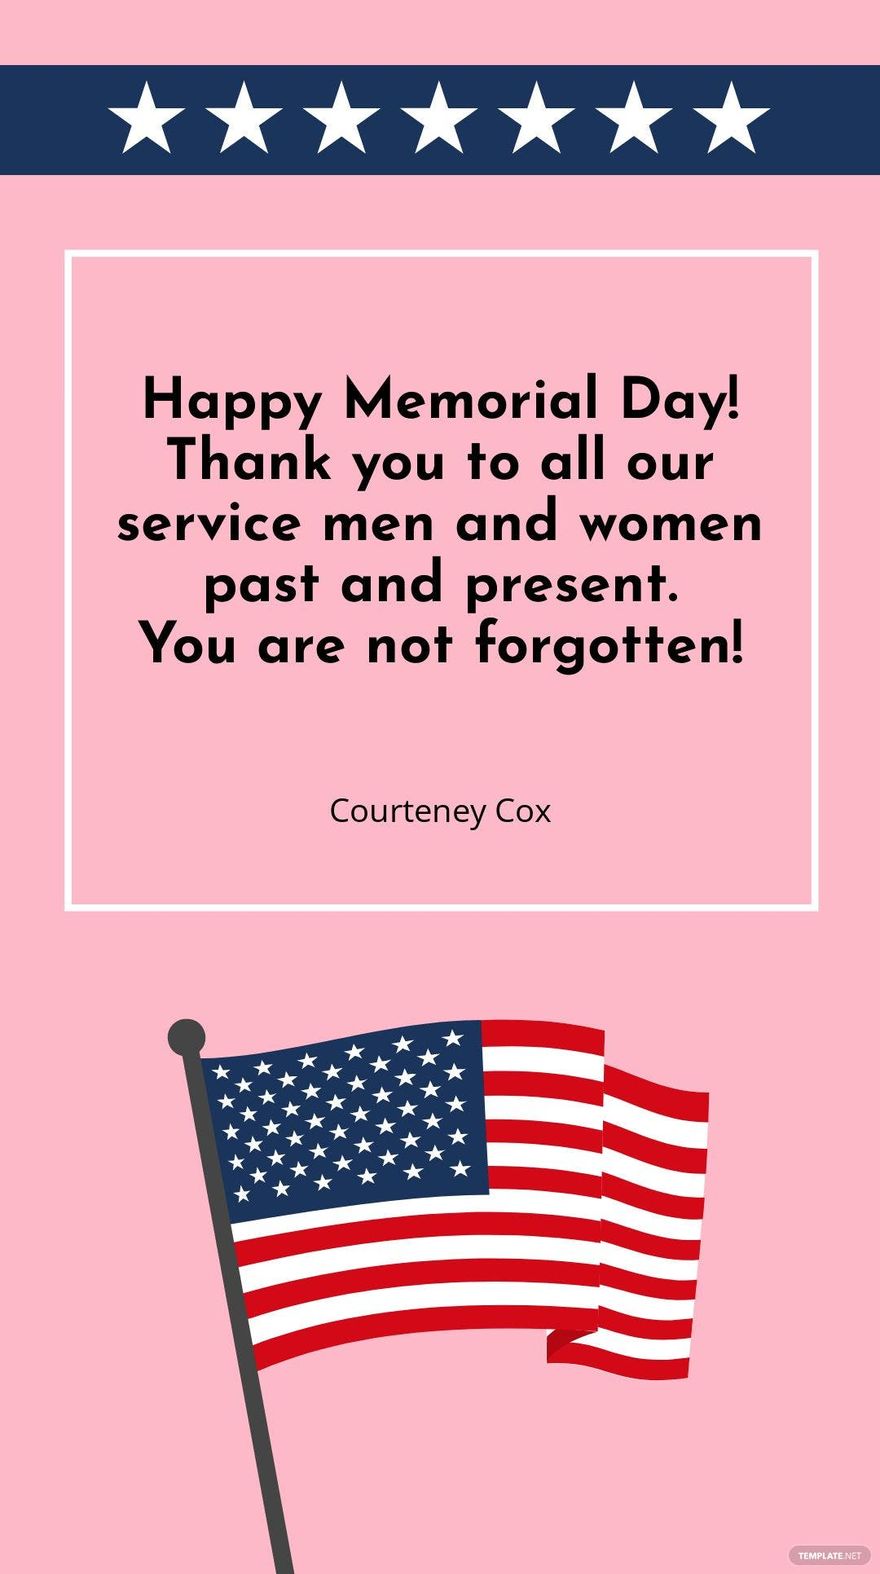 Free Courteney Cox - Happy Memorial Day! Thank you to all our service men and women past and present. You are not forgotten!